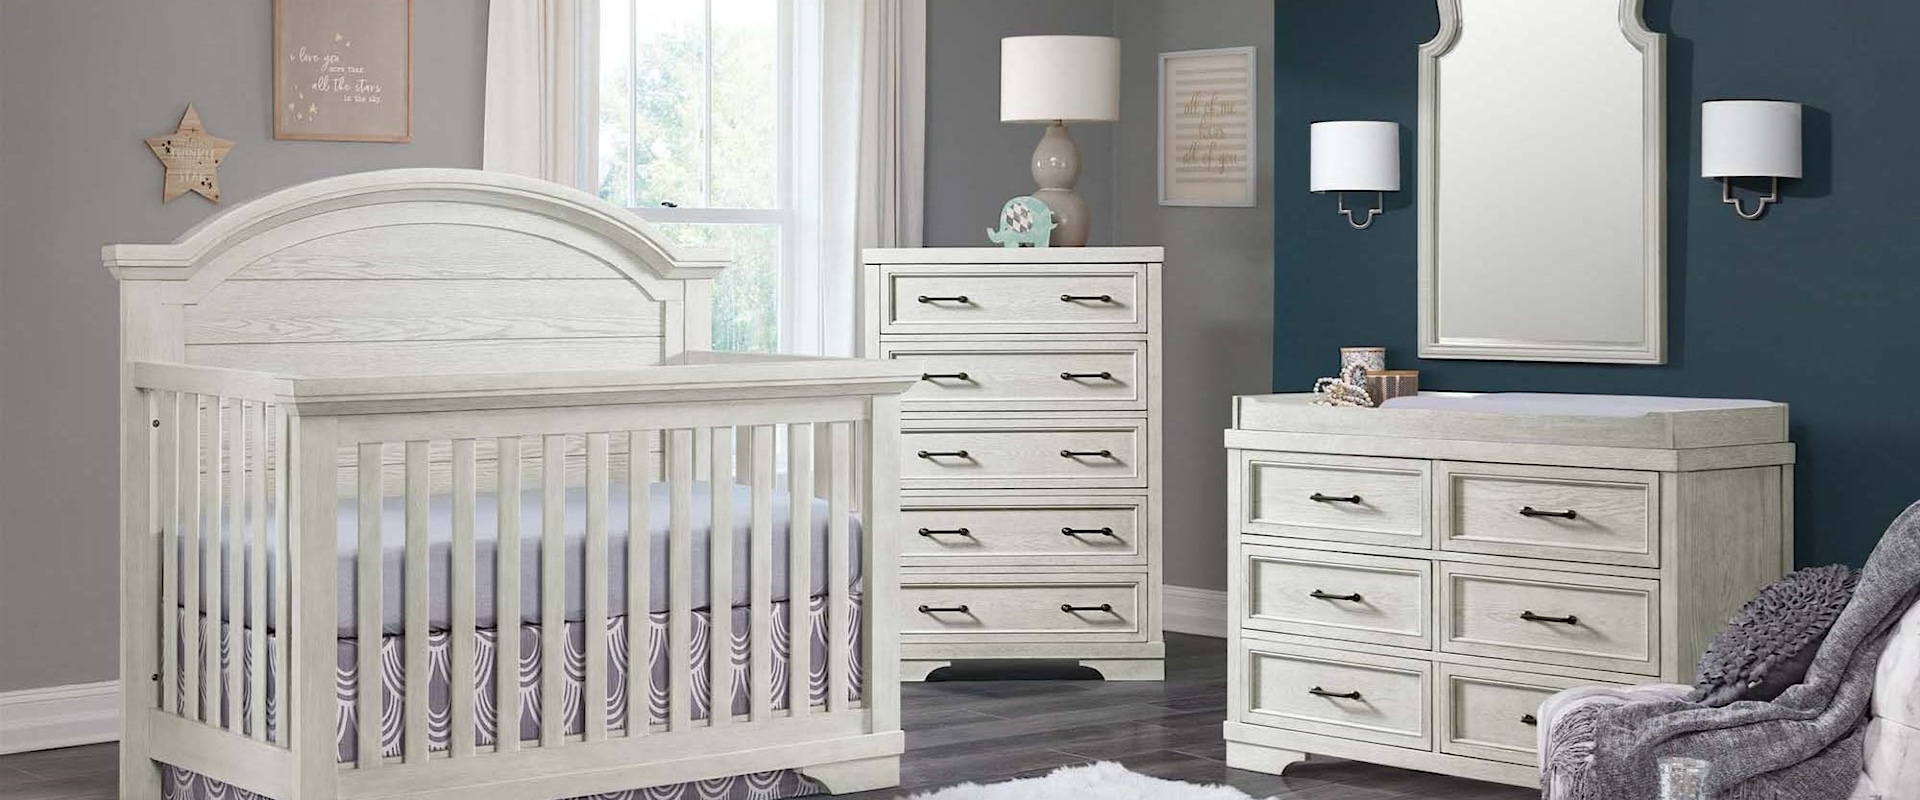 Baby Bedroom Group with Crib